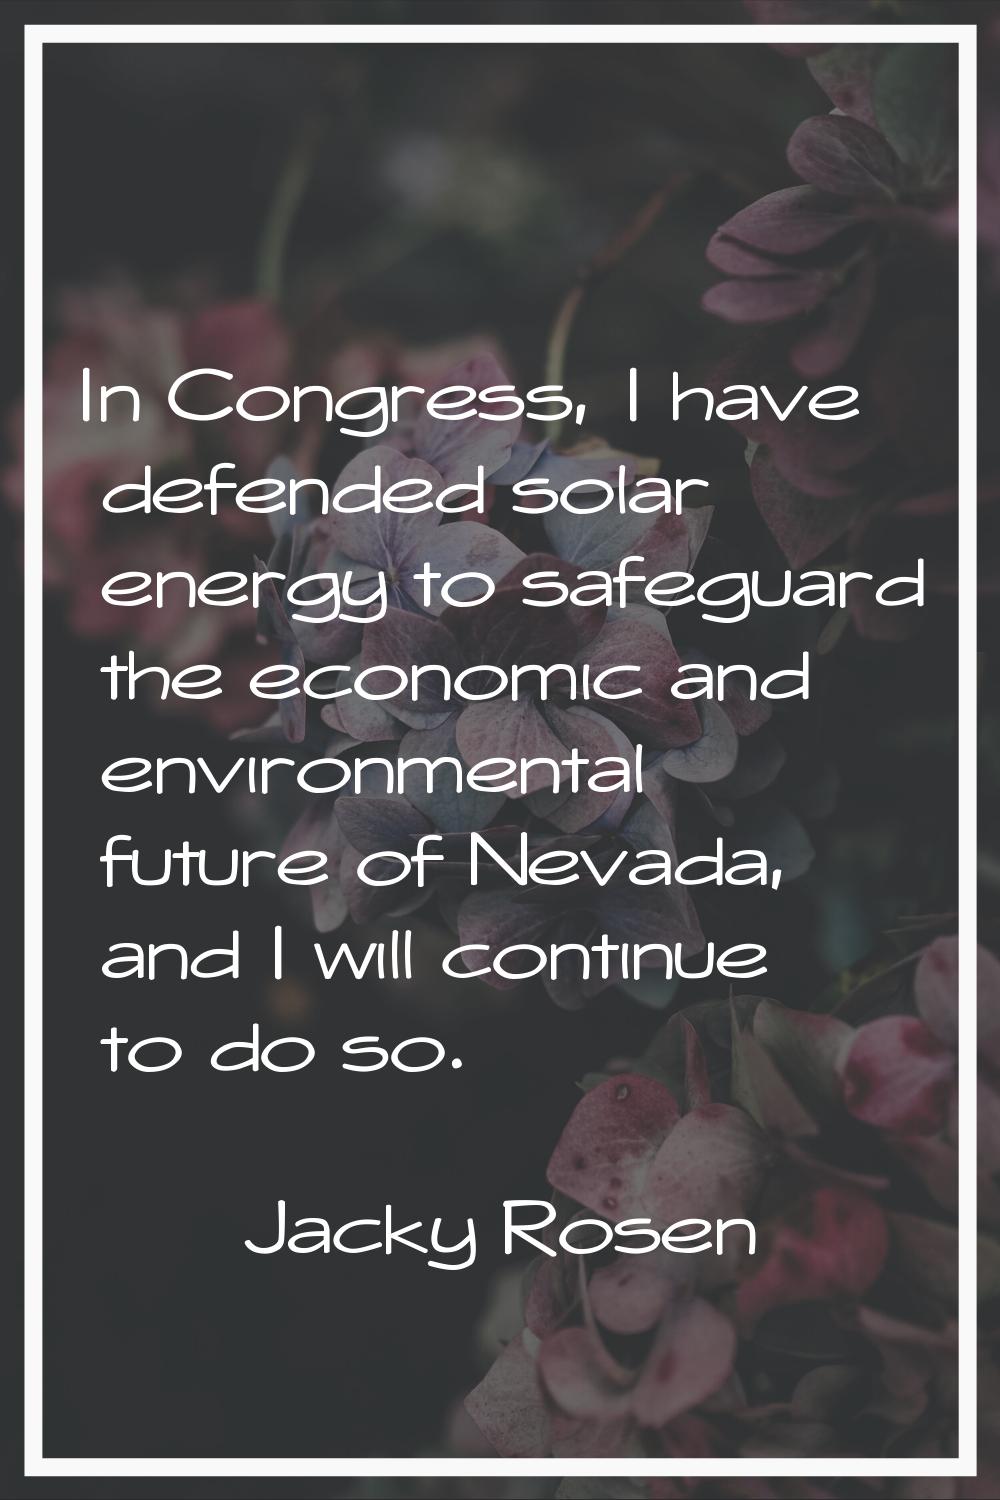 In Congress, I have defended solar energy to safeguard the economic and environmental future of Nev